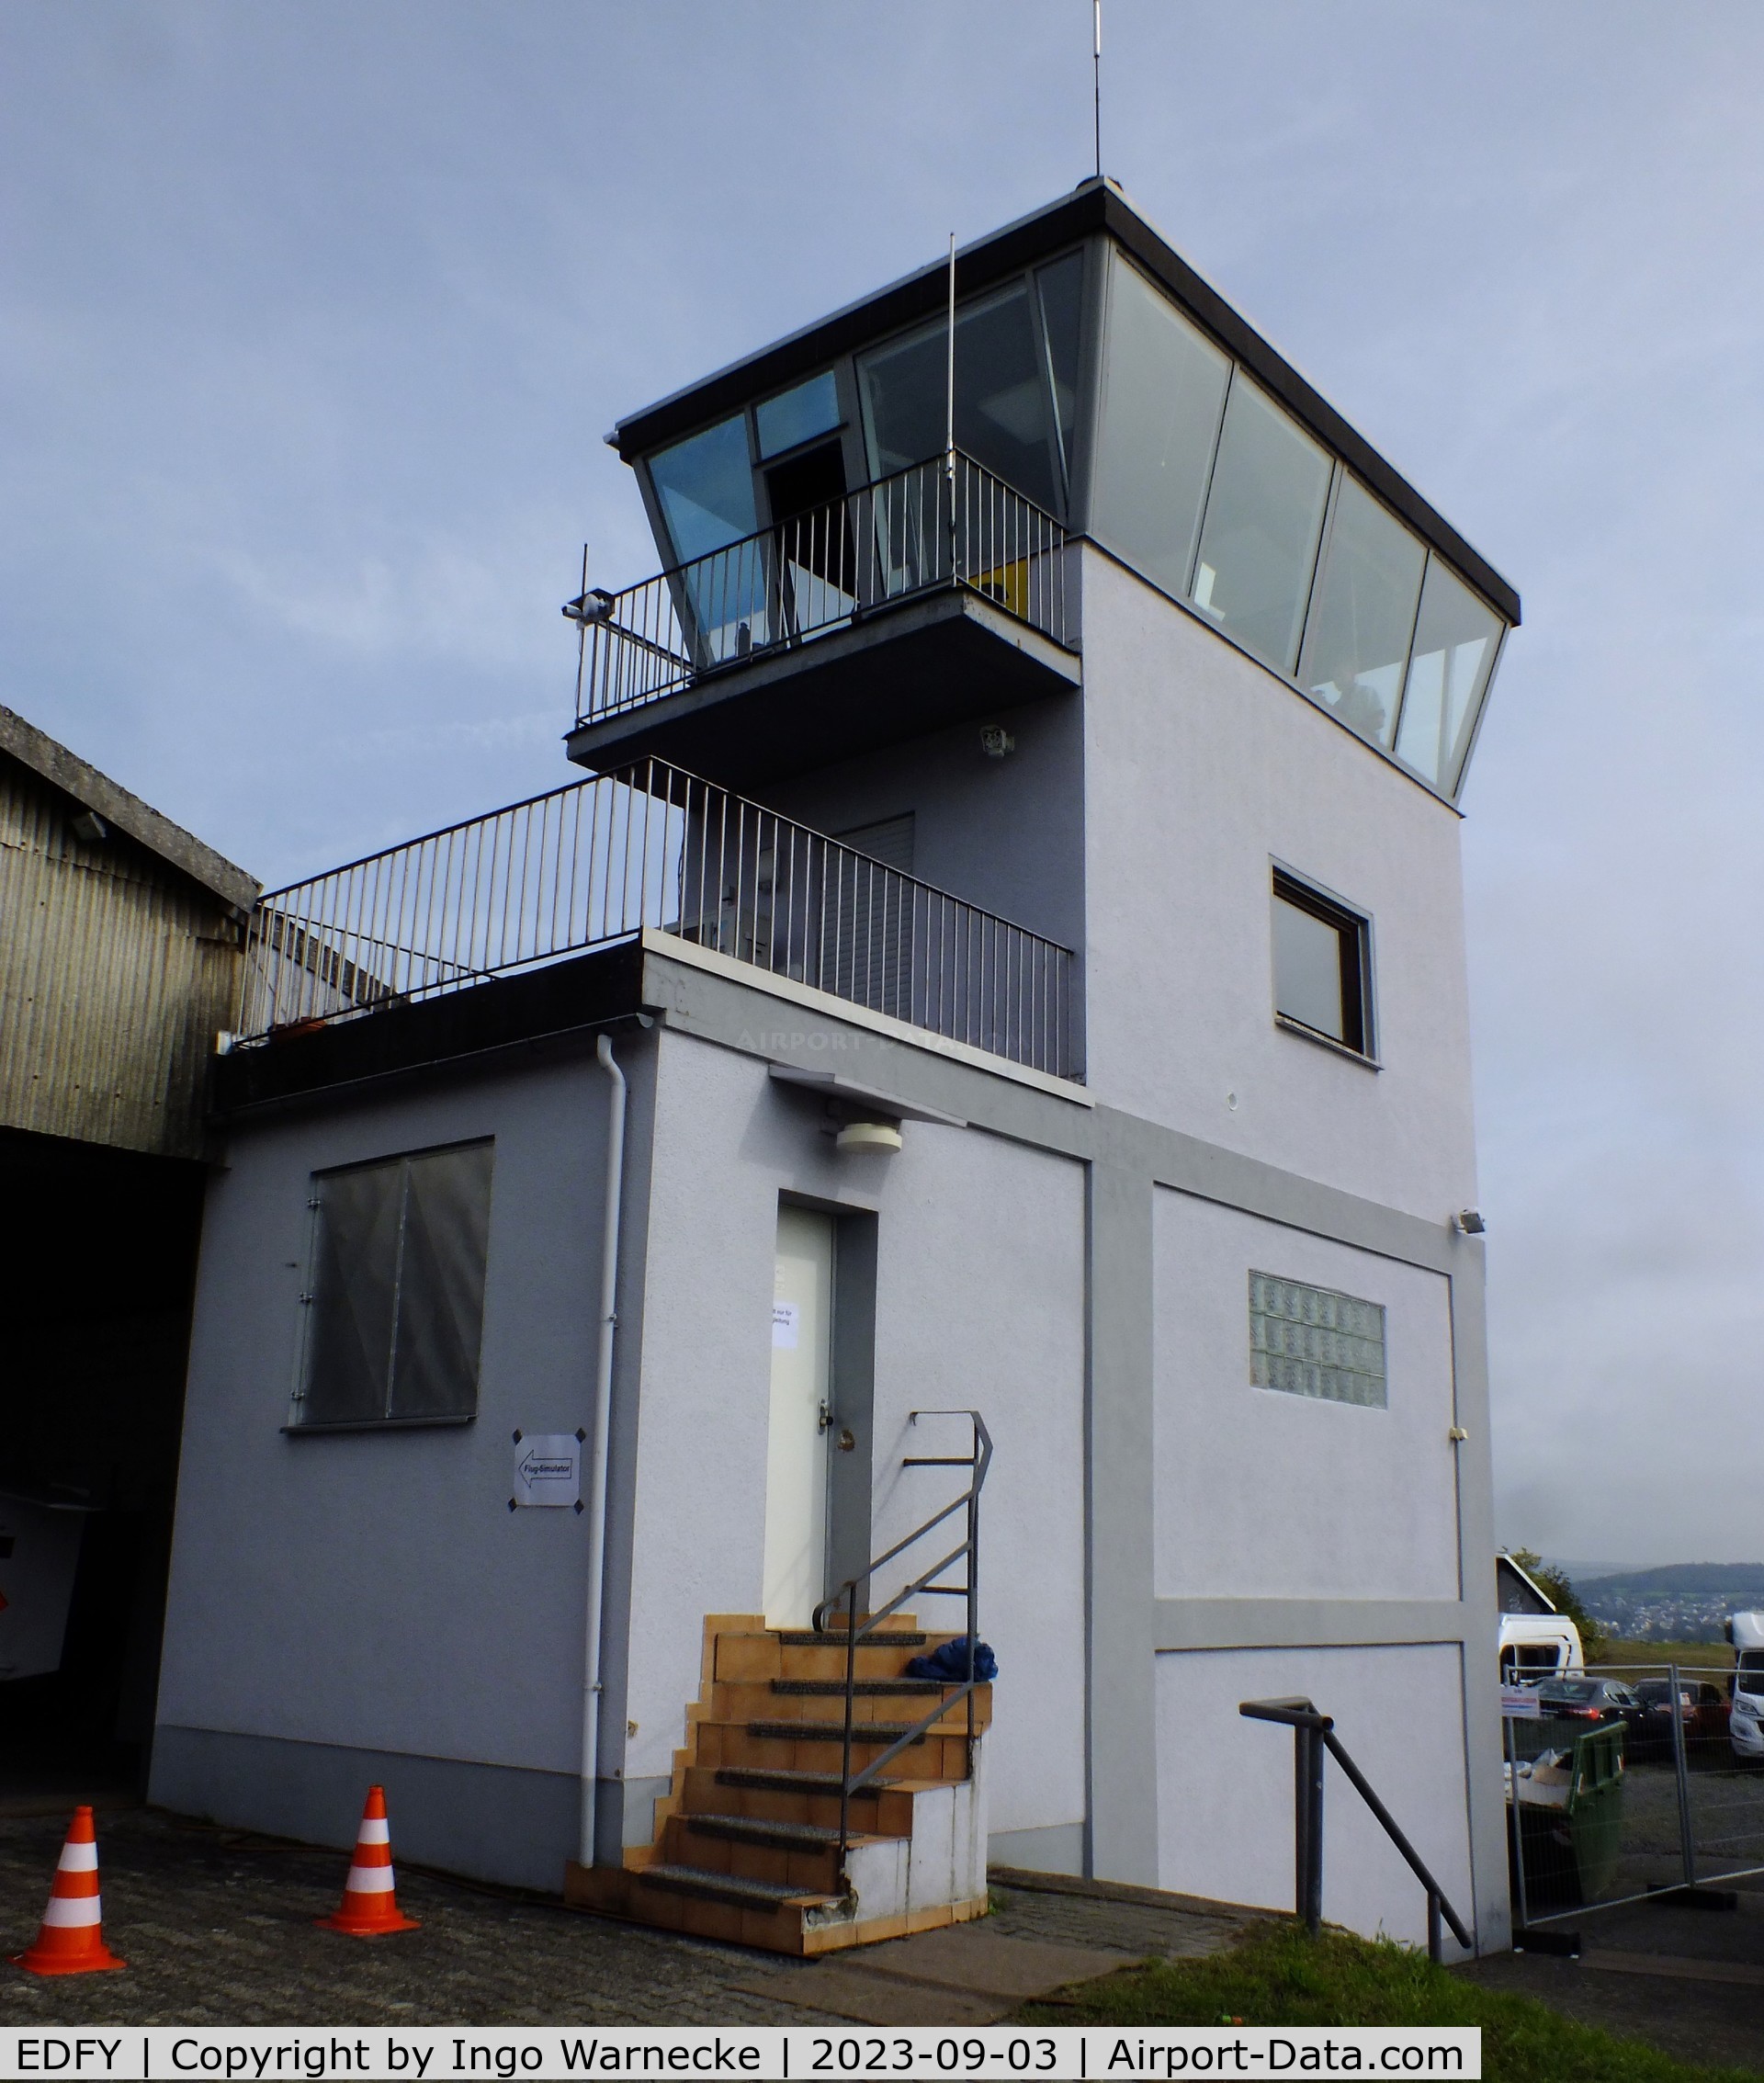 EDFY Airport - tower at Elz airfield